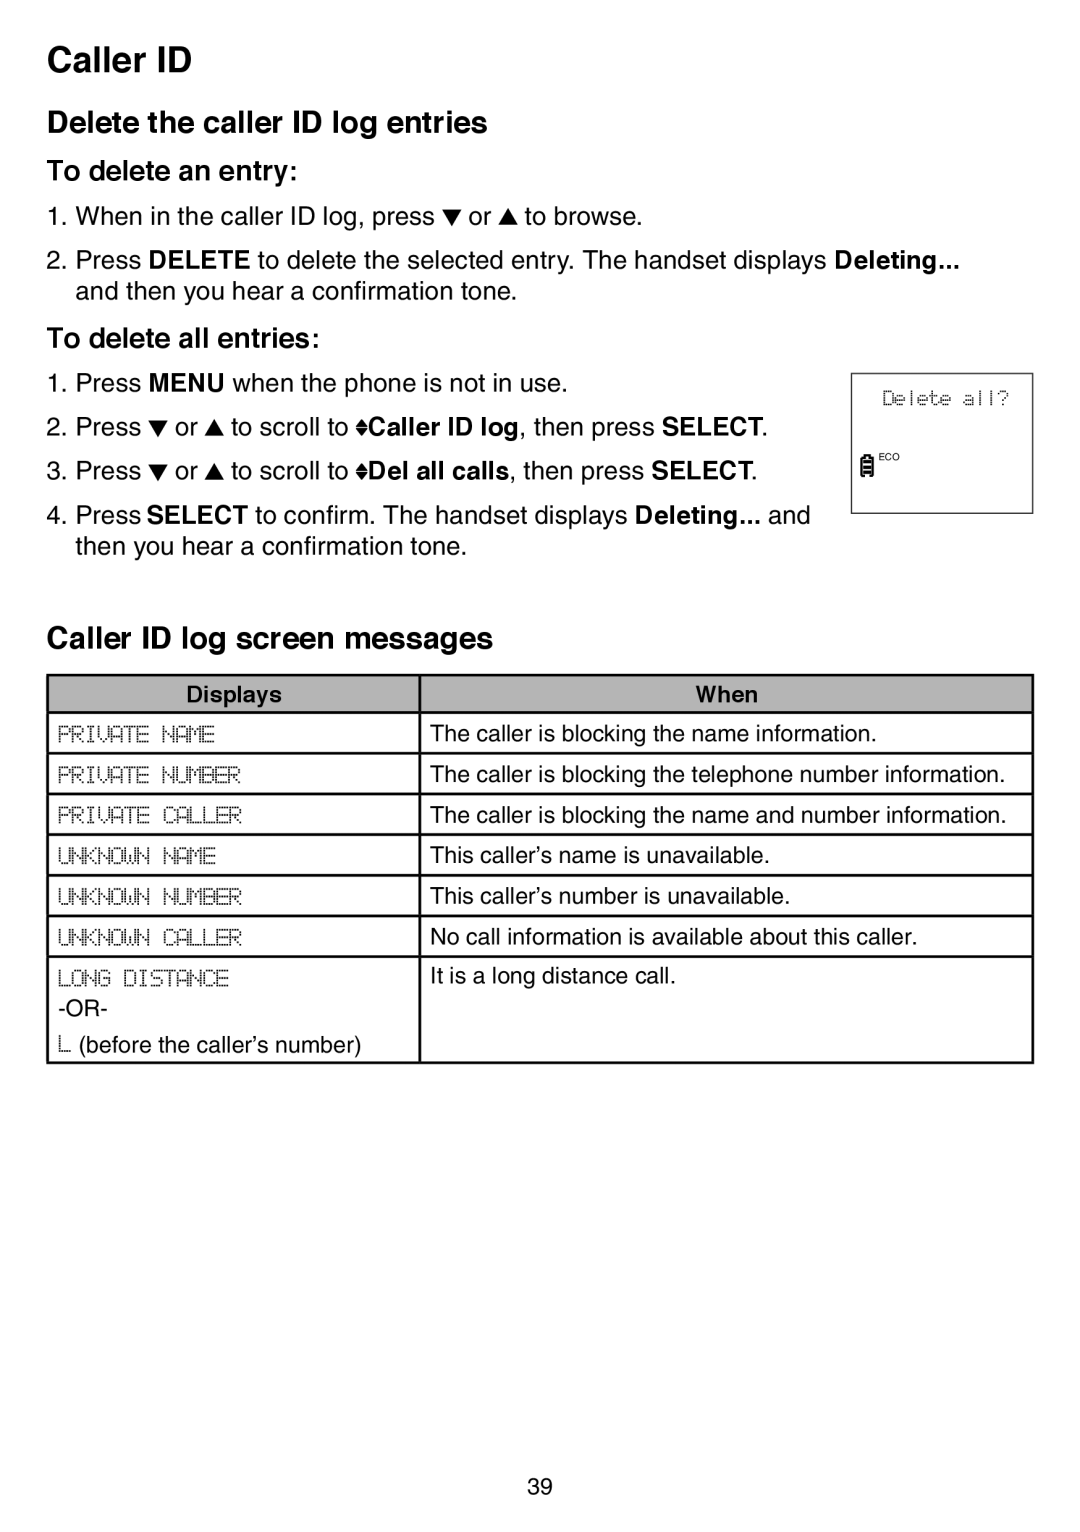 VTech CS6519-14 Delete the caller ID log entries, Caller ID log screen messages, To delete an entry, To delete all entries 